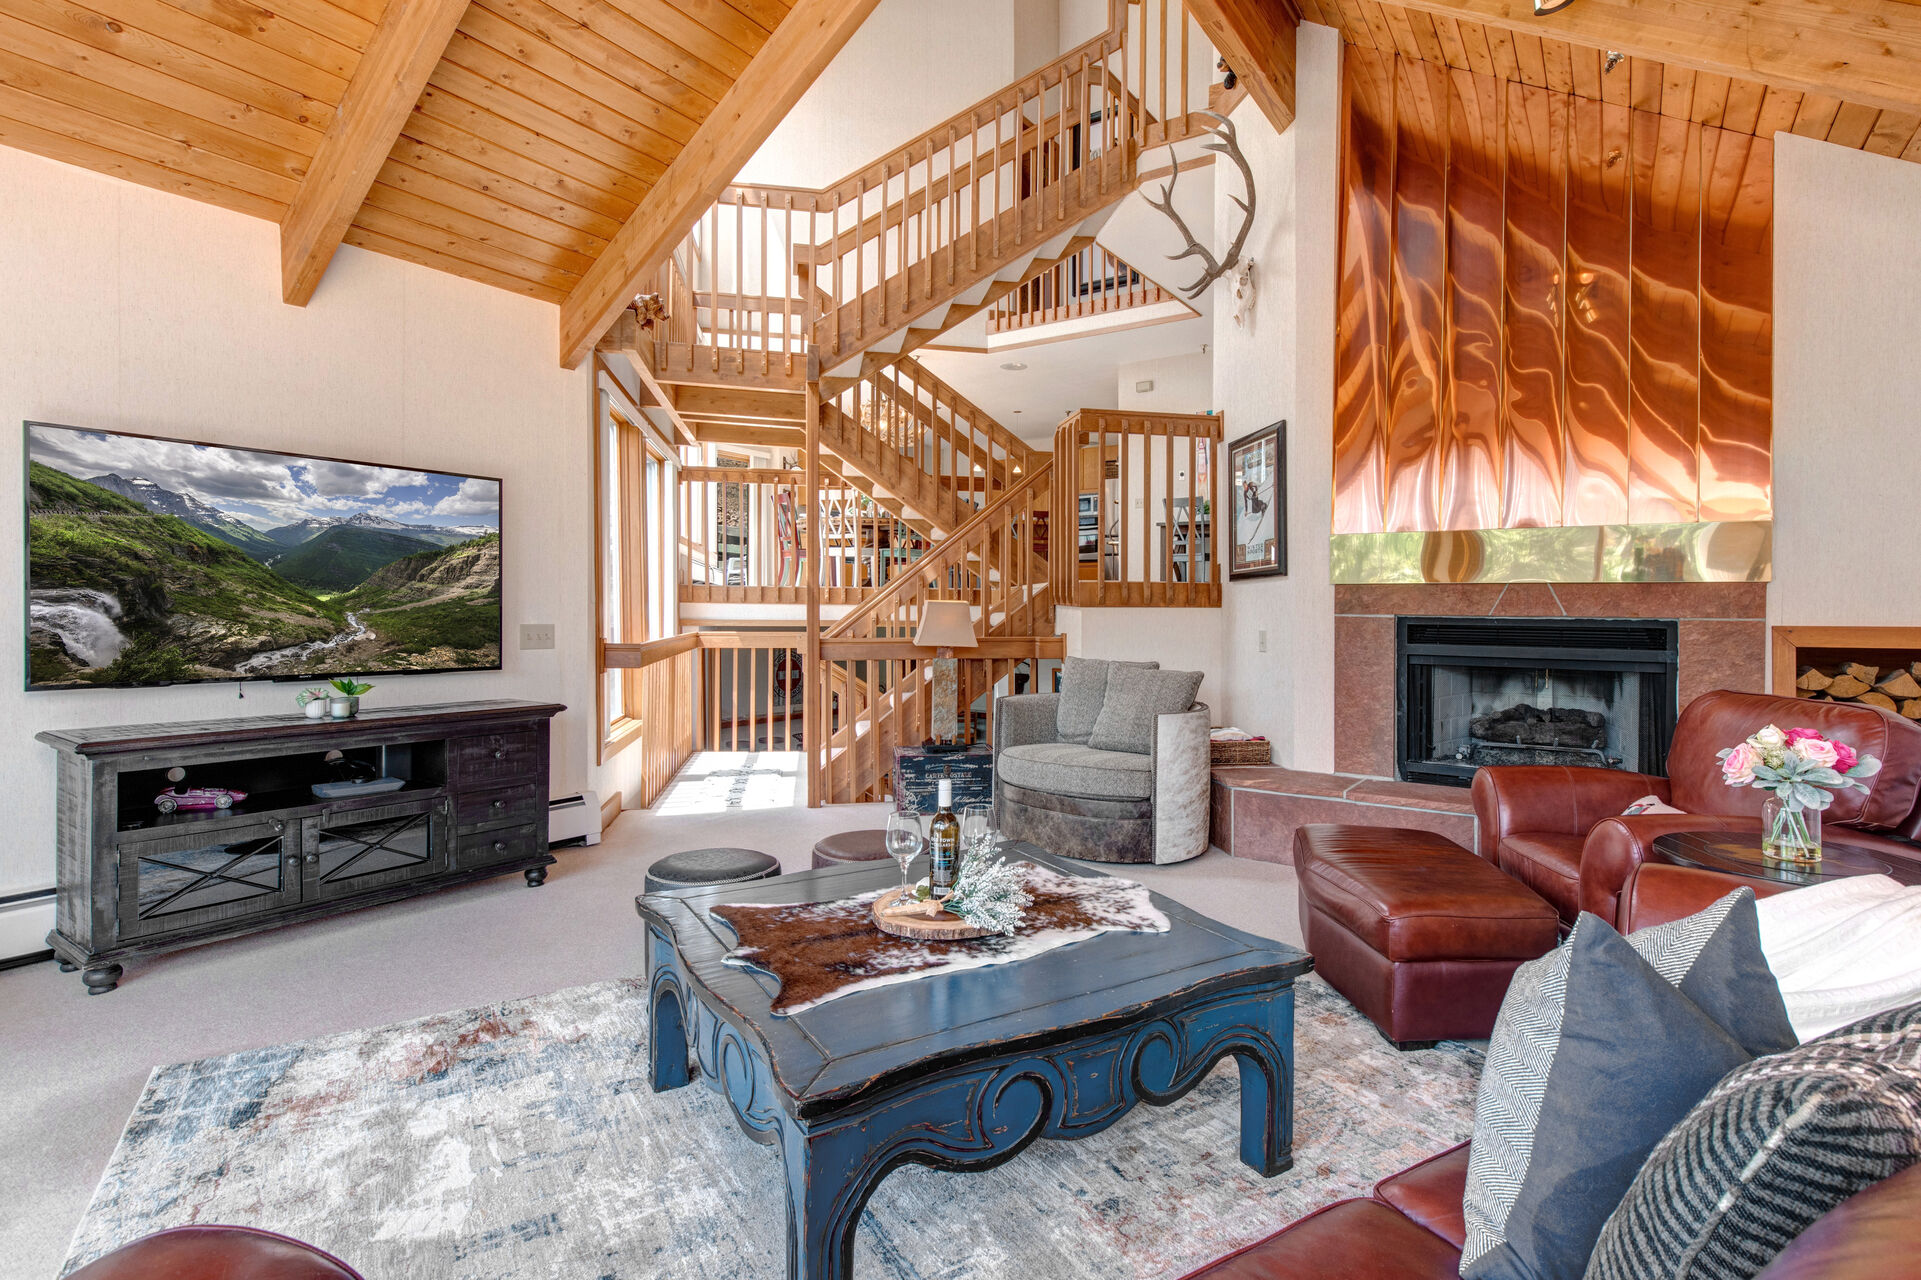 Living Room with plush leather furniture, smart TV, gas fireplace, and private, wrap-around deck access